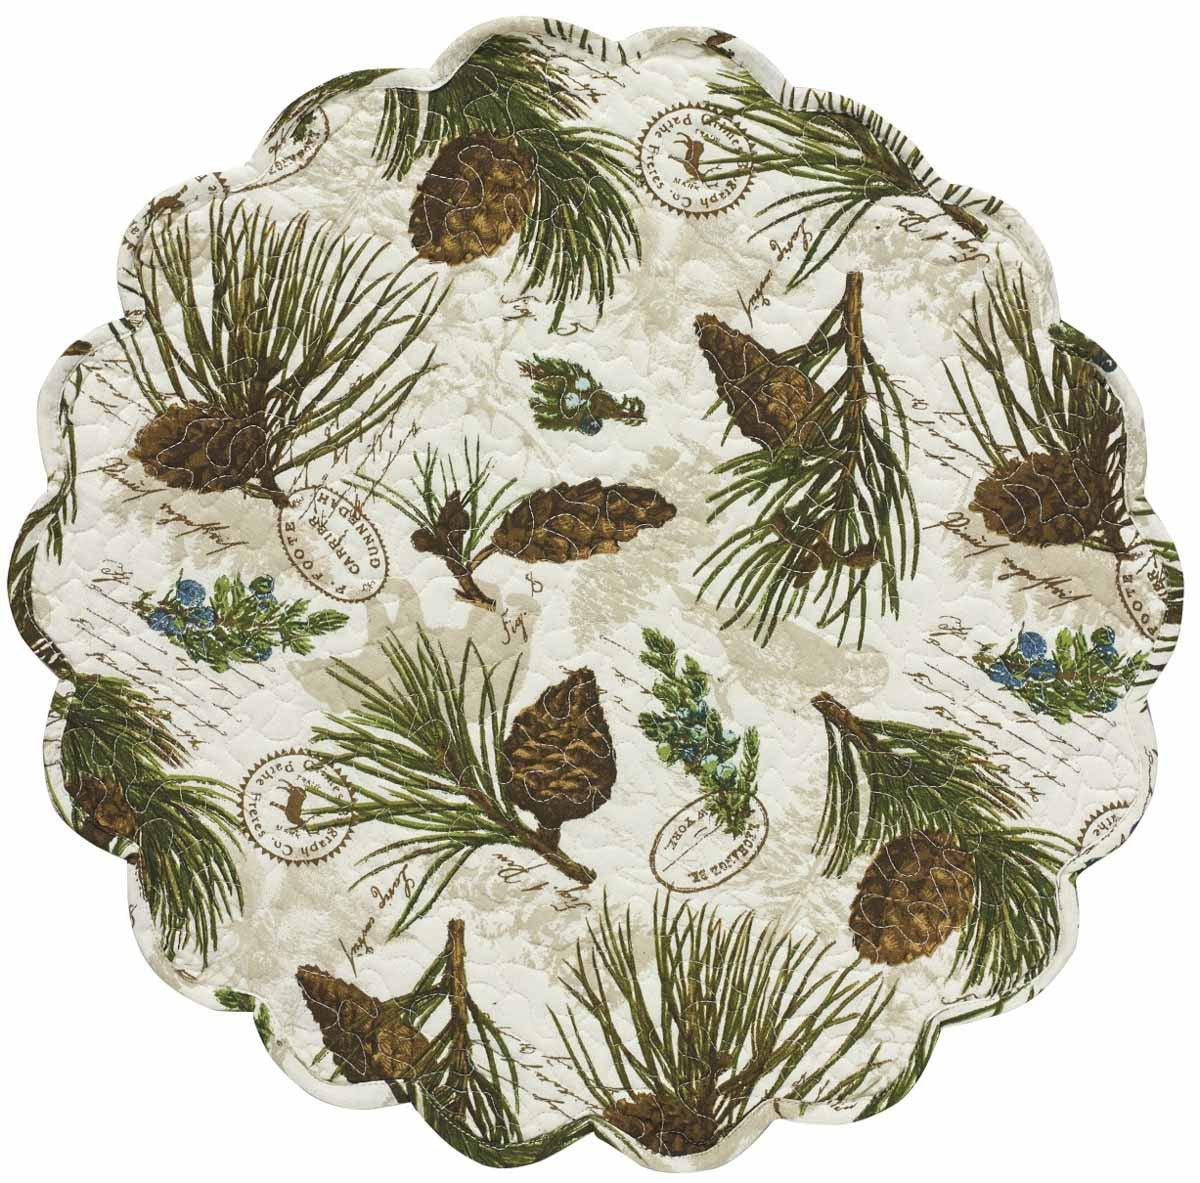 Walk In The Woods Placemats - Set Of 6 Park Designs - The Fox Decor